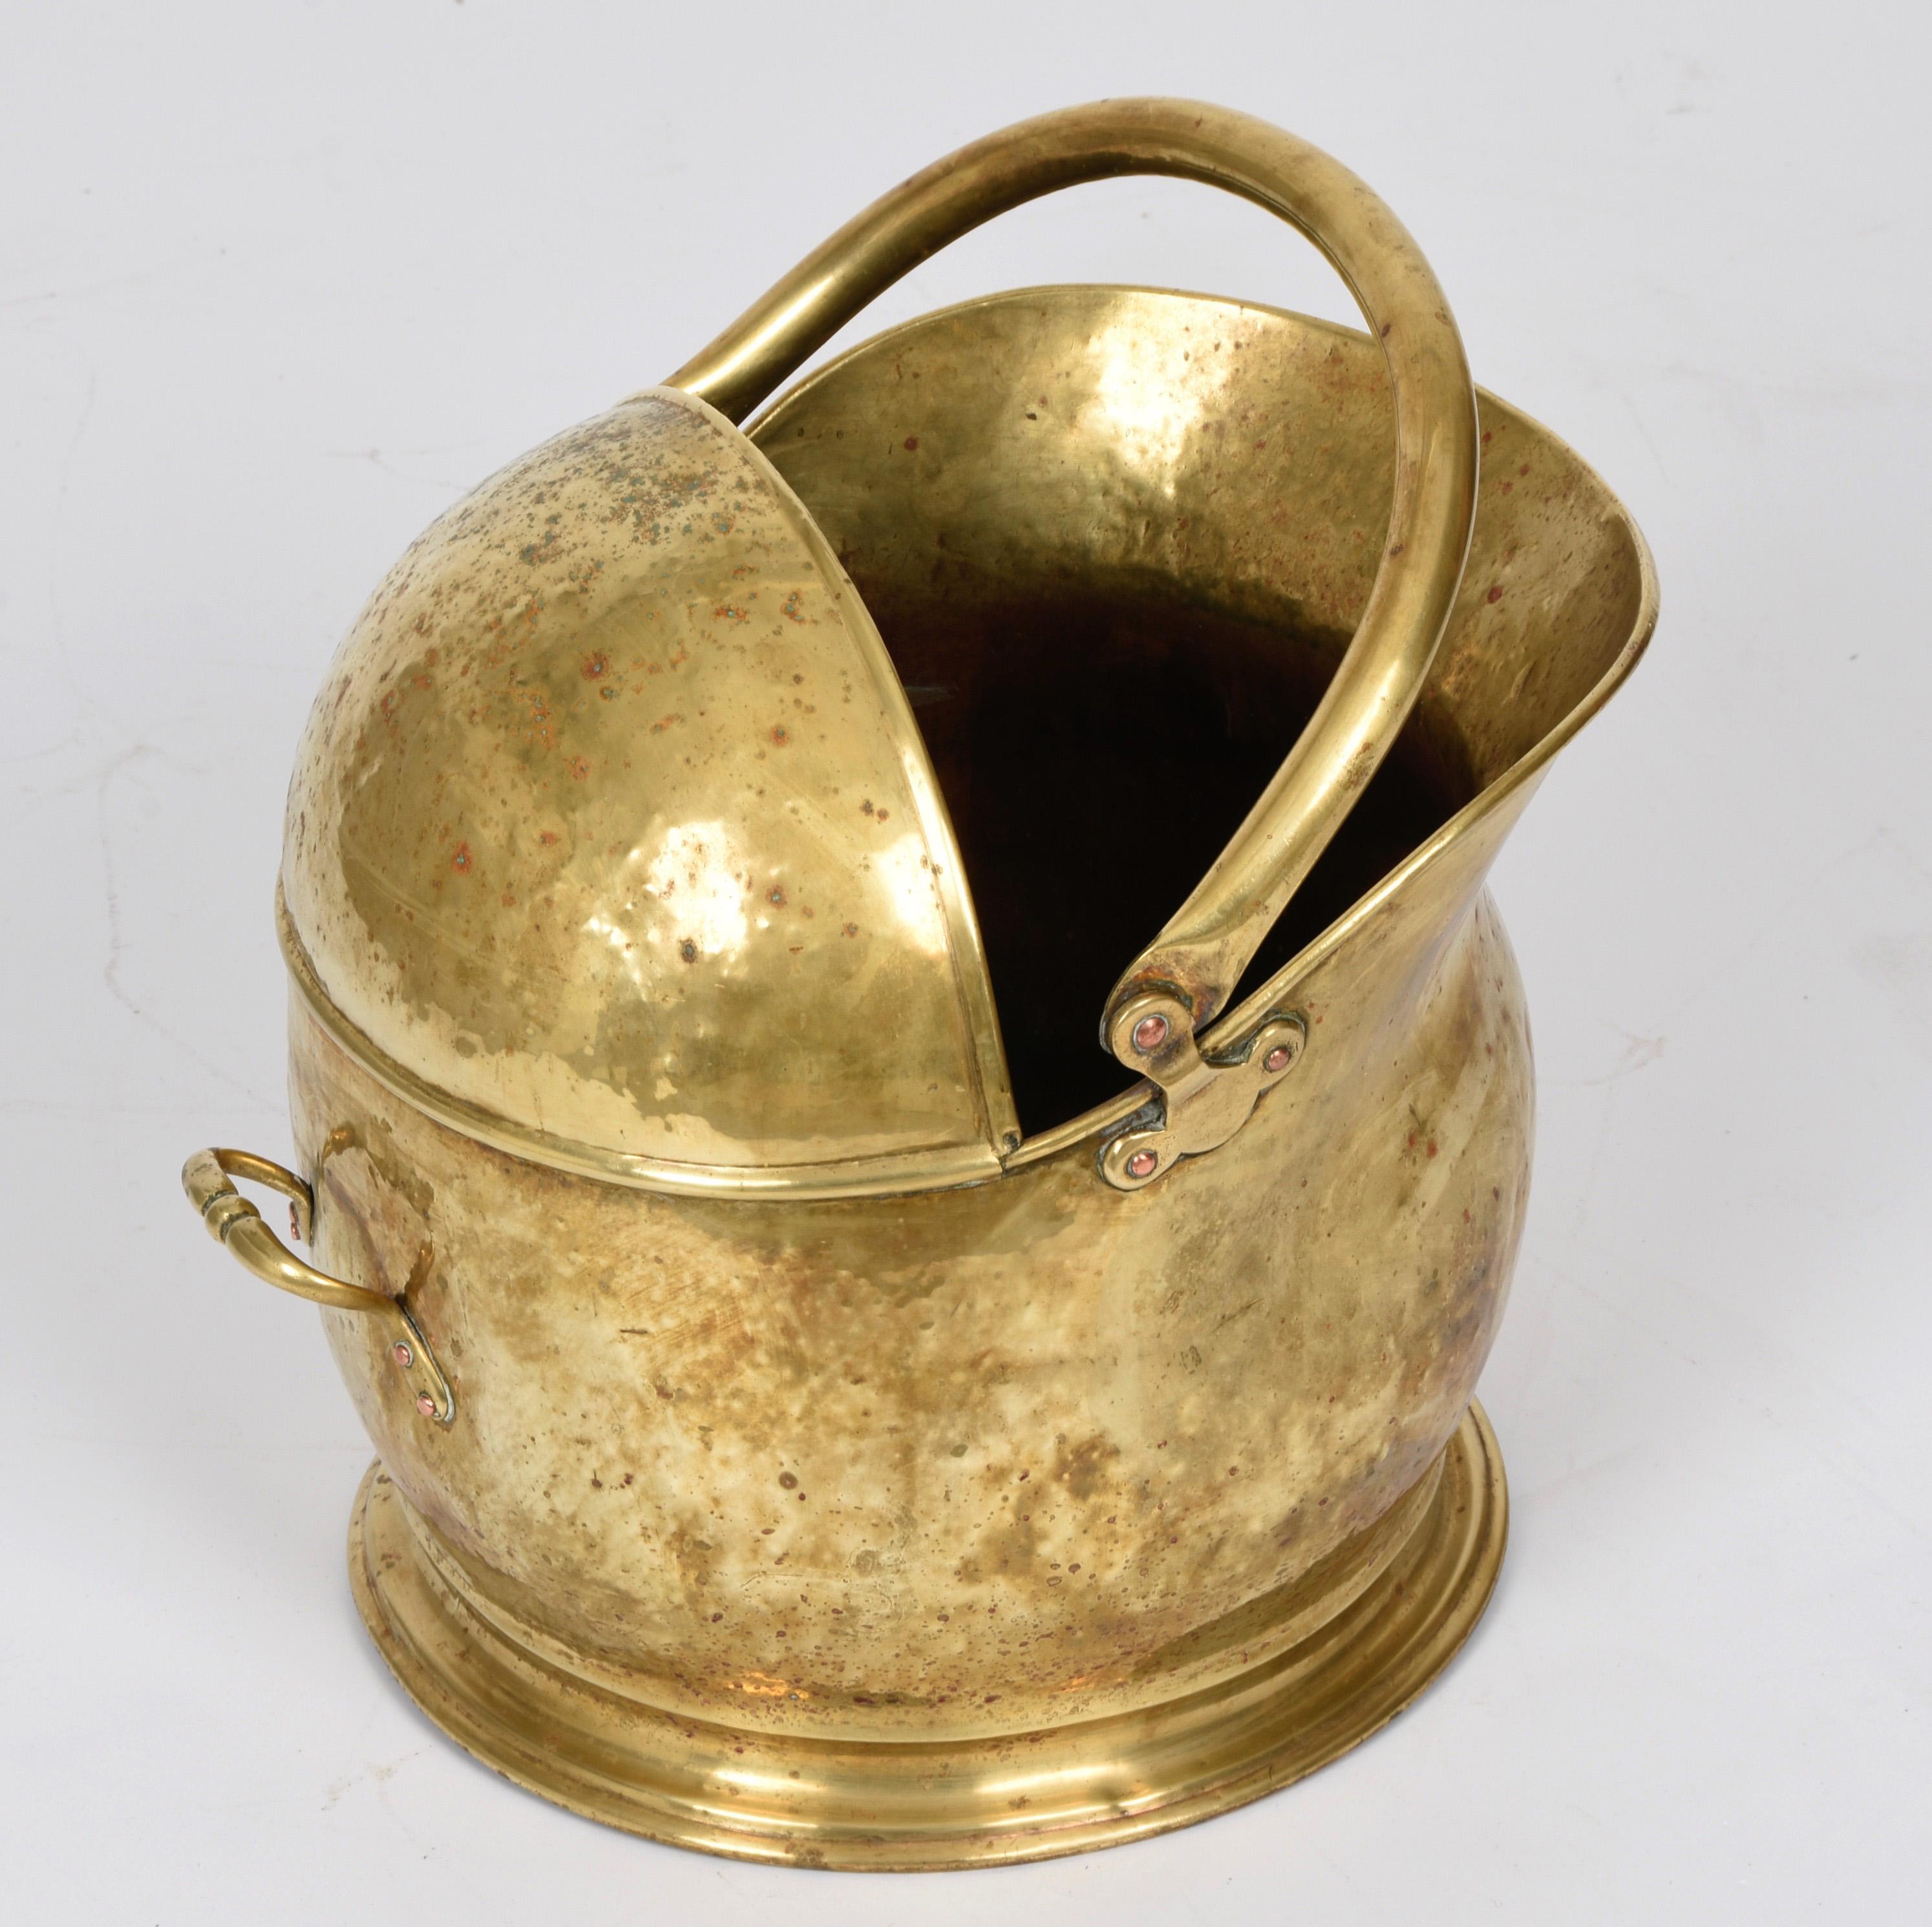 Brass Helmet-shaped brass coal bucket from the early 1900s, Italy, 1930s